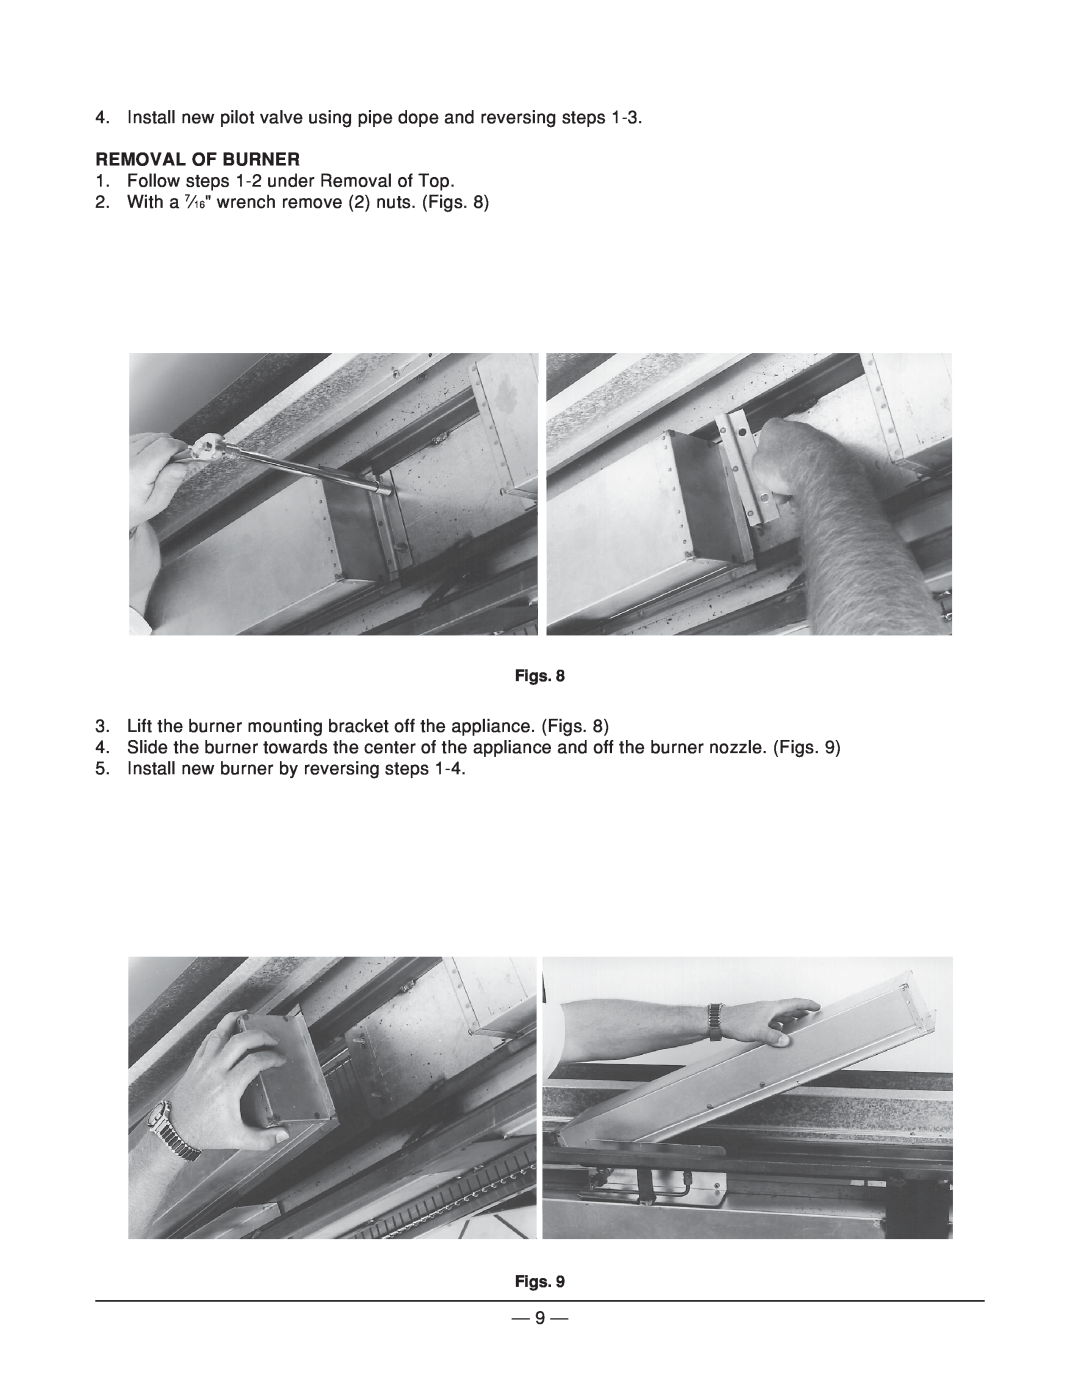 Vulcan-Hart ICM72, ICM24 Removal Of Burner, Follow steps 1-2under Removal of Top, With a 7⁄16 wrench remove 2 nuts. Figs 